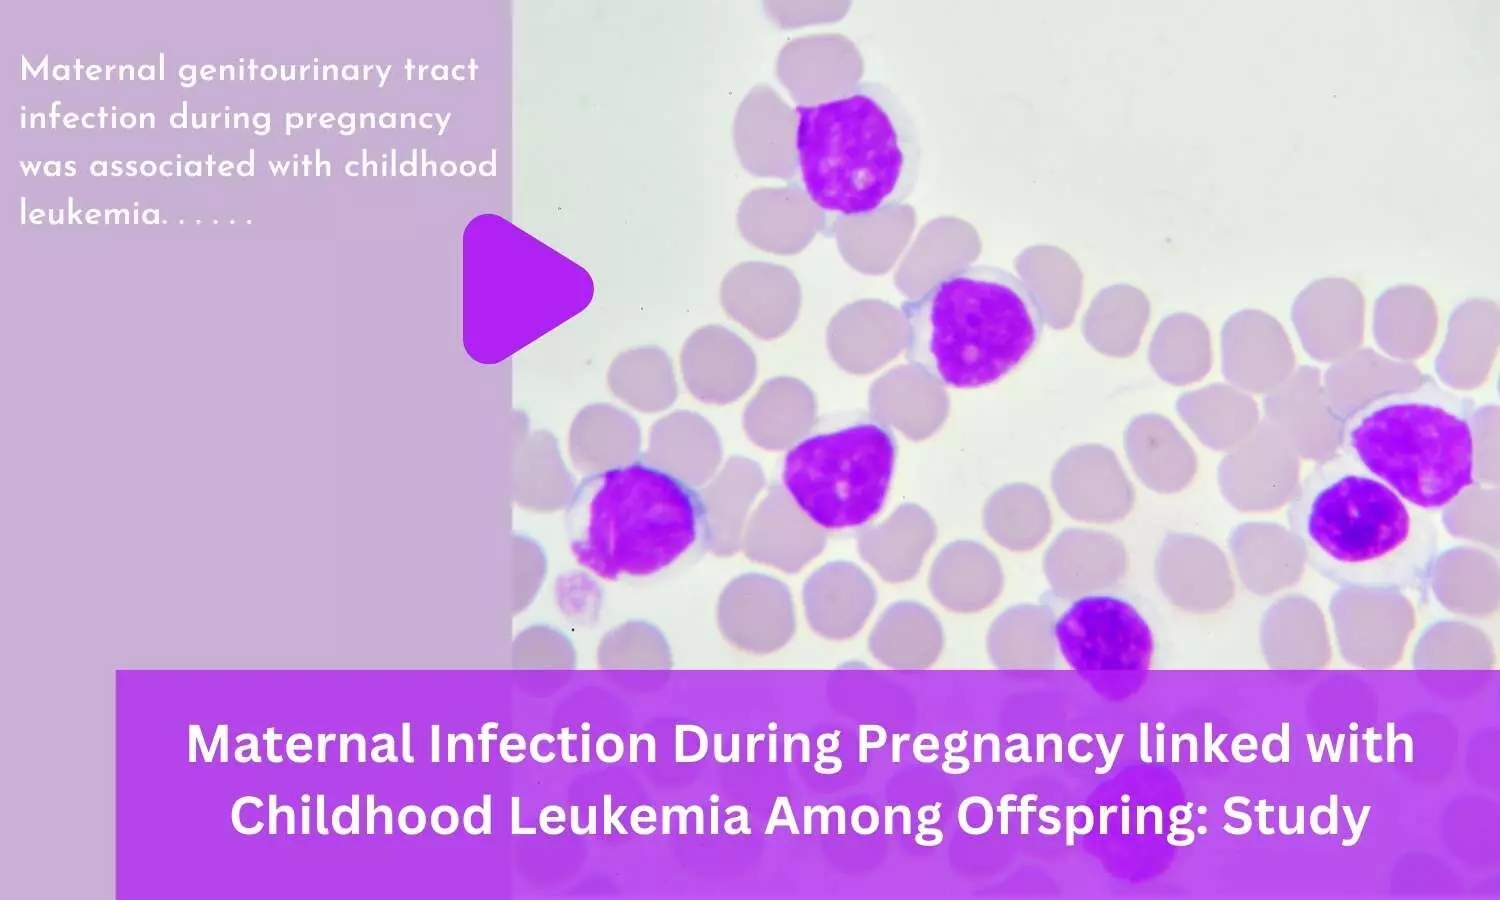 Maternal infection during pregnancy linked with childhood Leukemia among offspring: Study